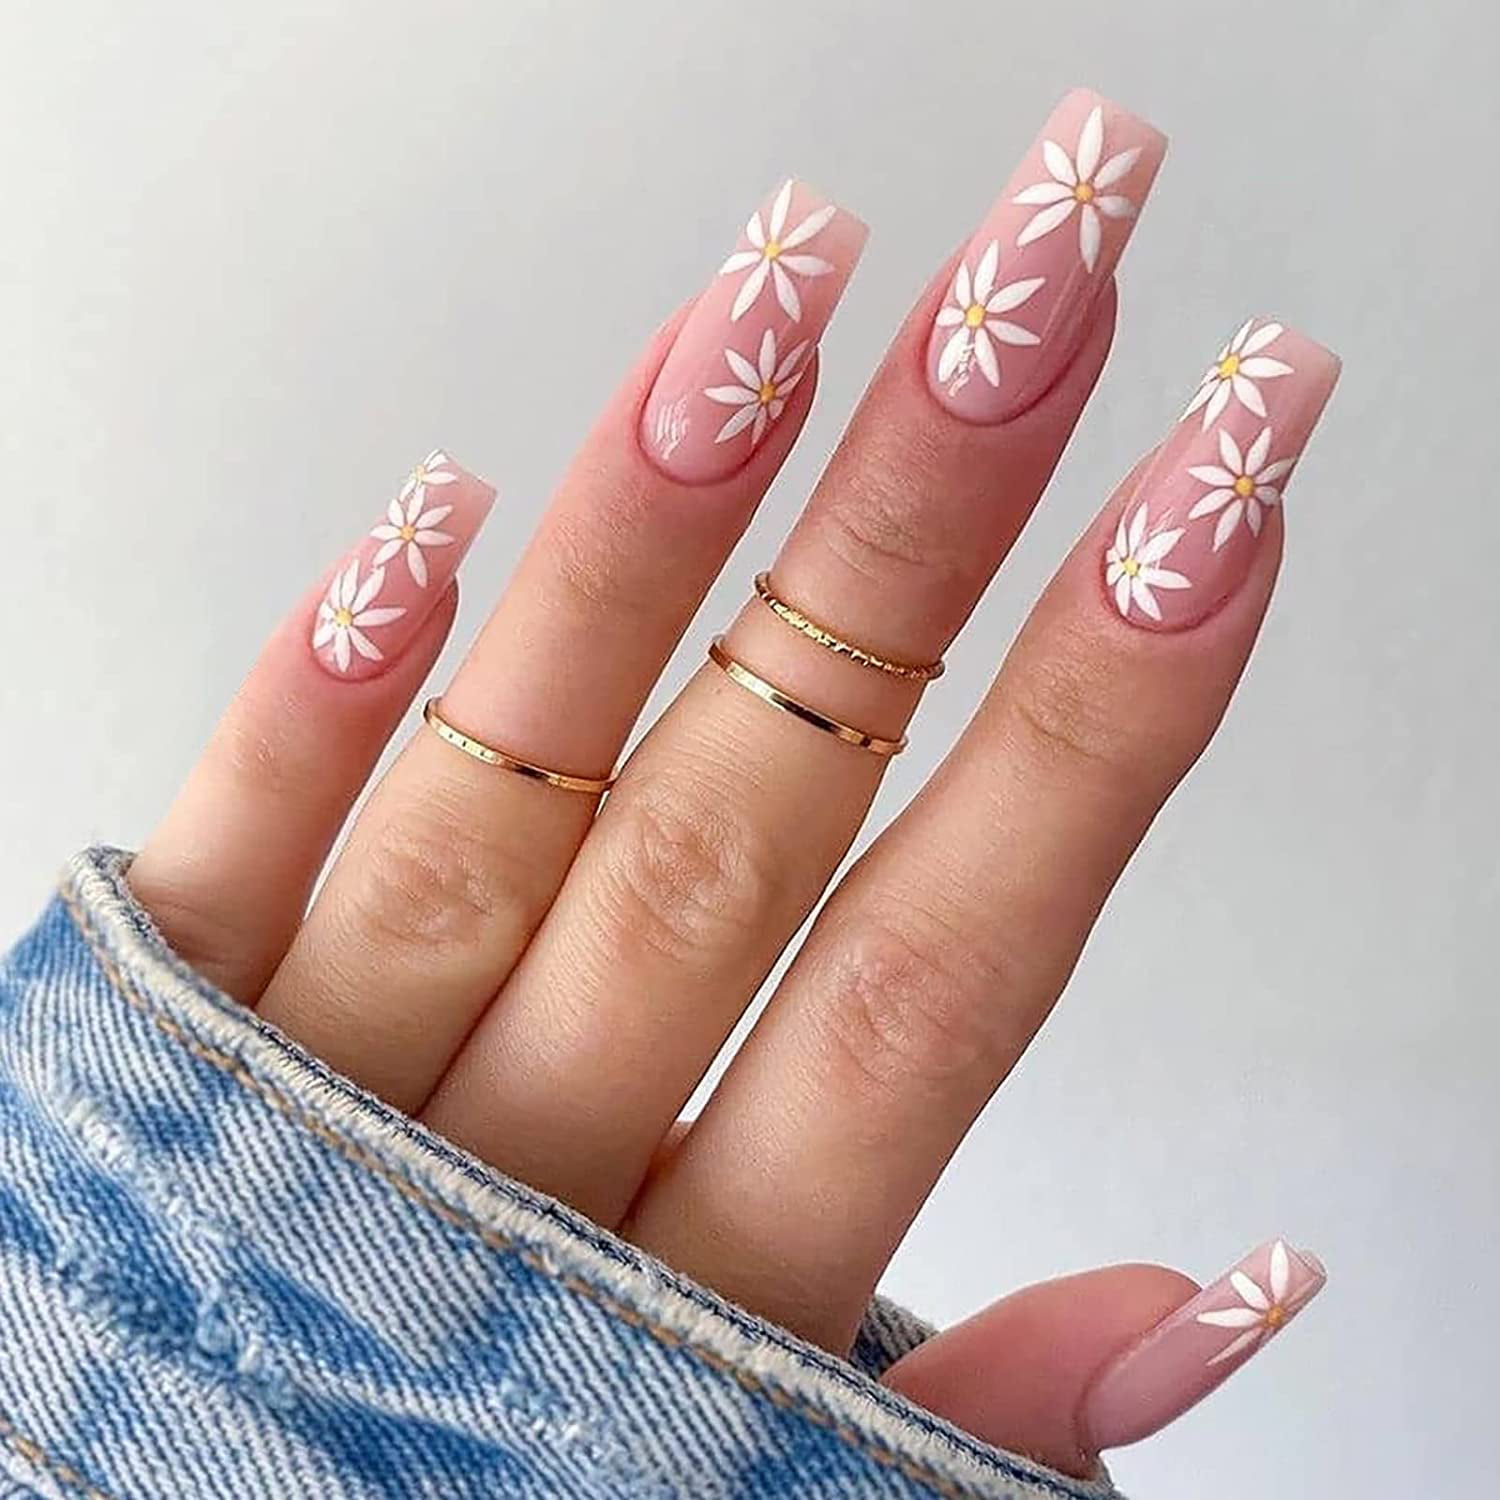 24 Pcs Press on Nails Long Coffin, Fake Nails with Nail Glue, False Nails  with Designs Acrylic Nails Glue On Nails for Women and Girls (Pink White  Flower) 